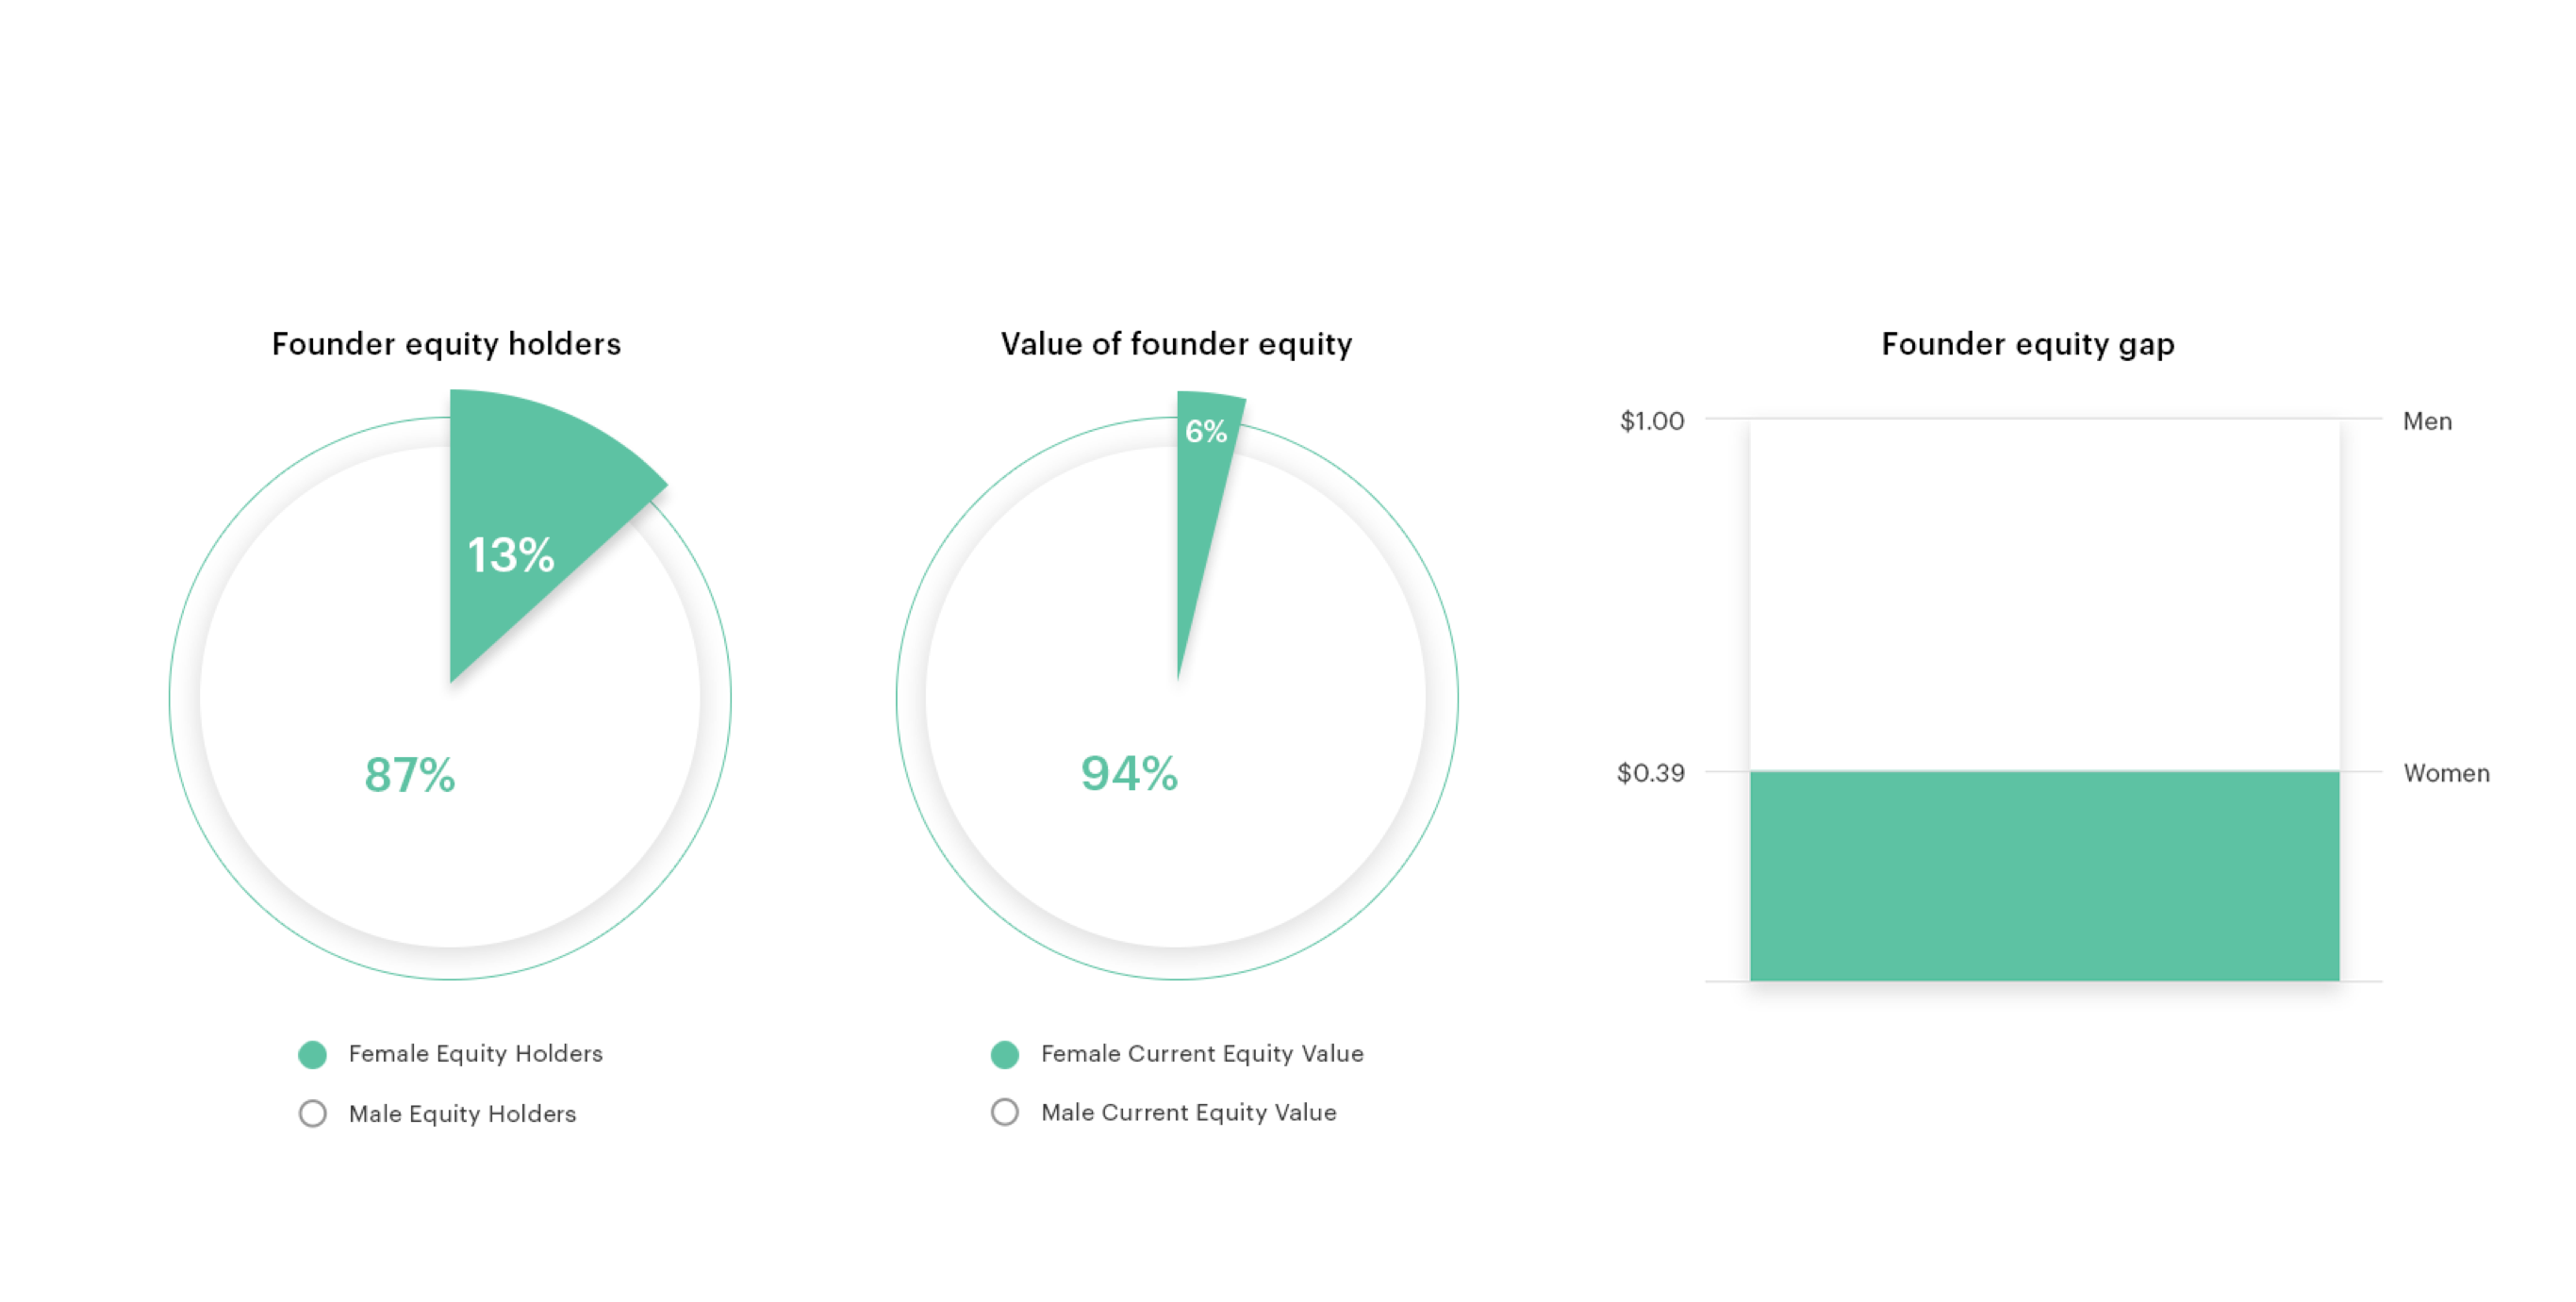 Analyzing the gender equity gap